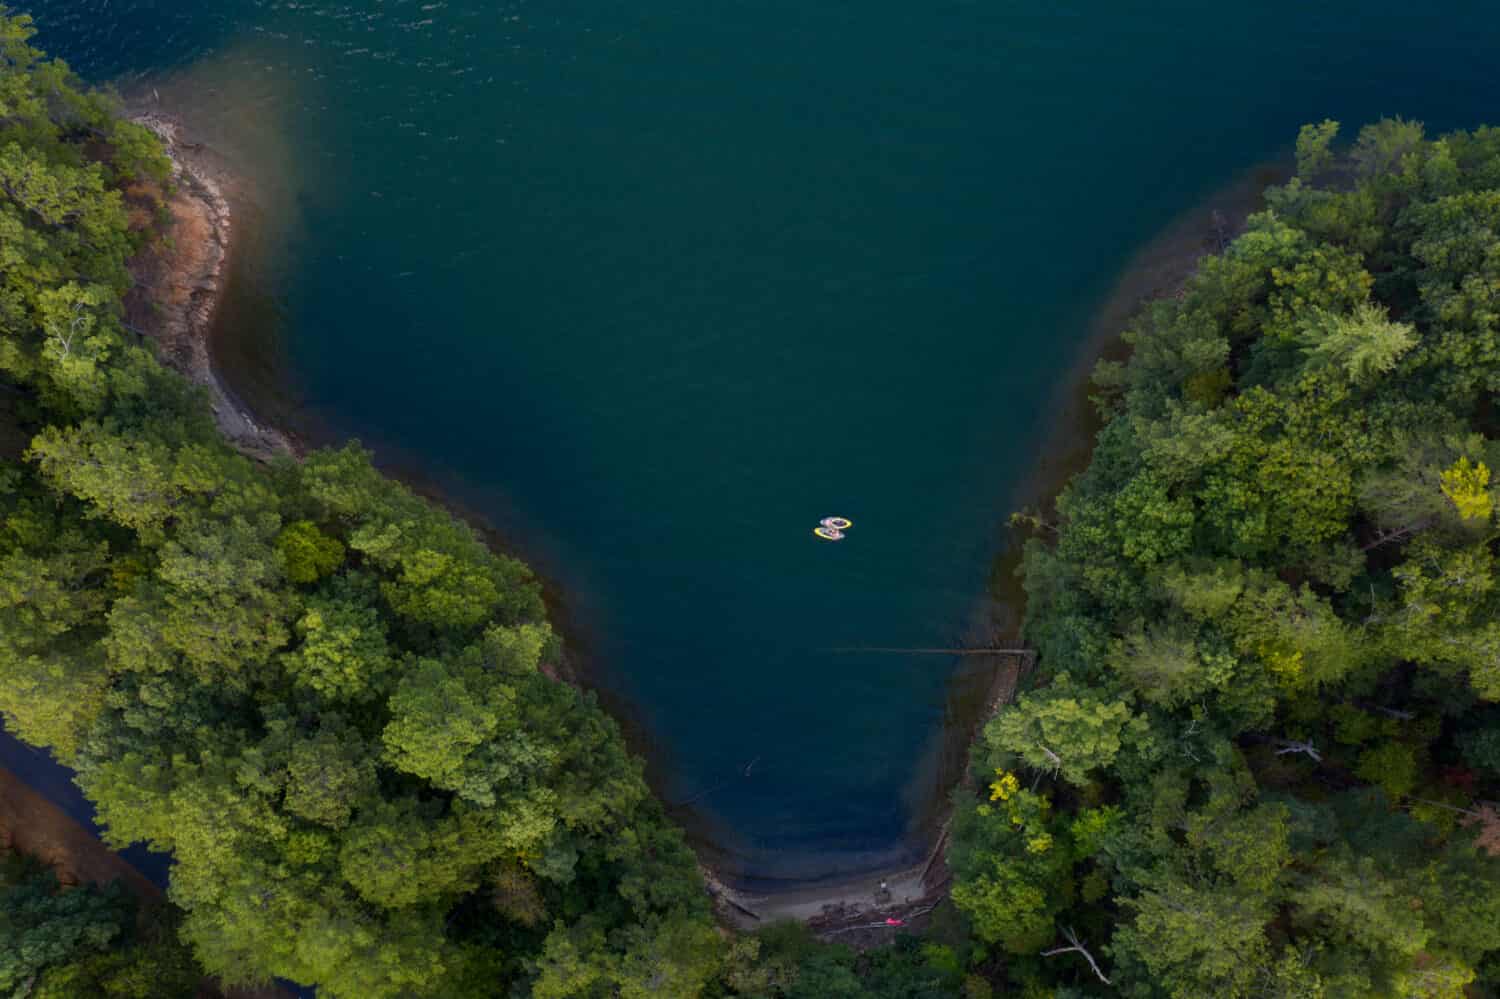 Two Kayakers hanging out in a cove in Carter Lake, Elijay, Georgia.  September 20, 2019.  Picture taken with a drone 